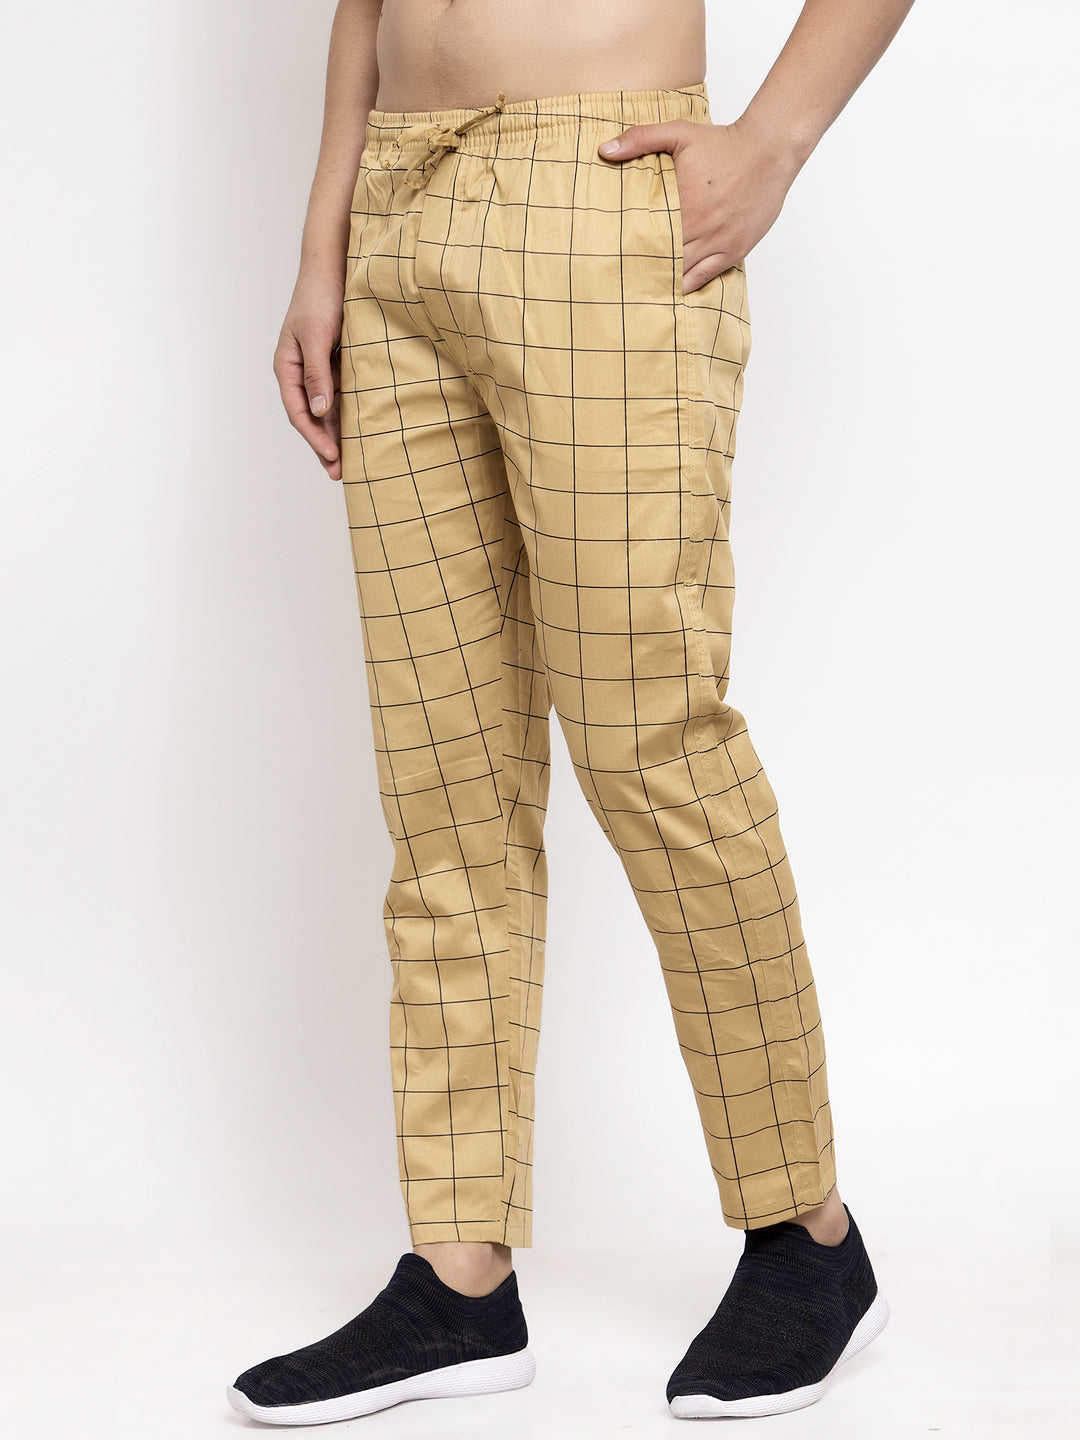 Buy Blue White Check Regular Fit Solid Trouser Cotton for Best Price,  Reviews, Free Shipping